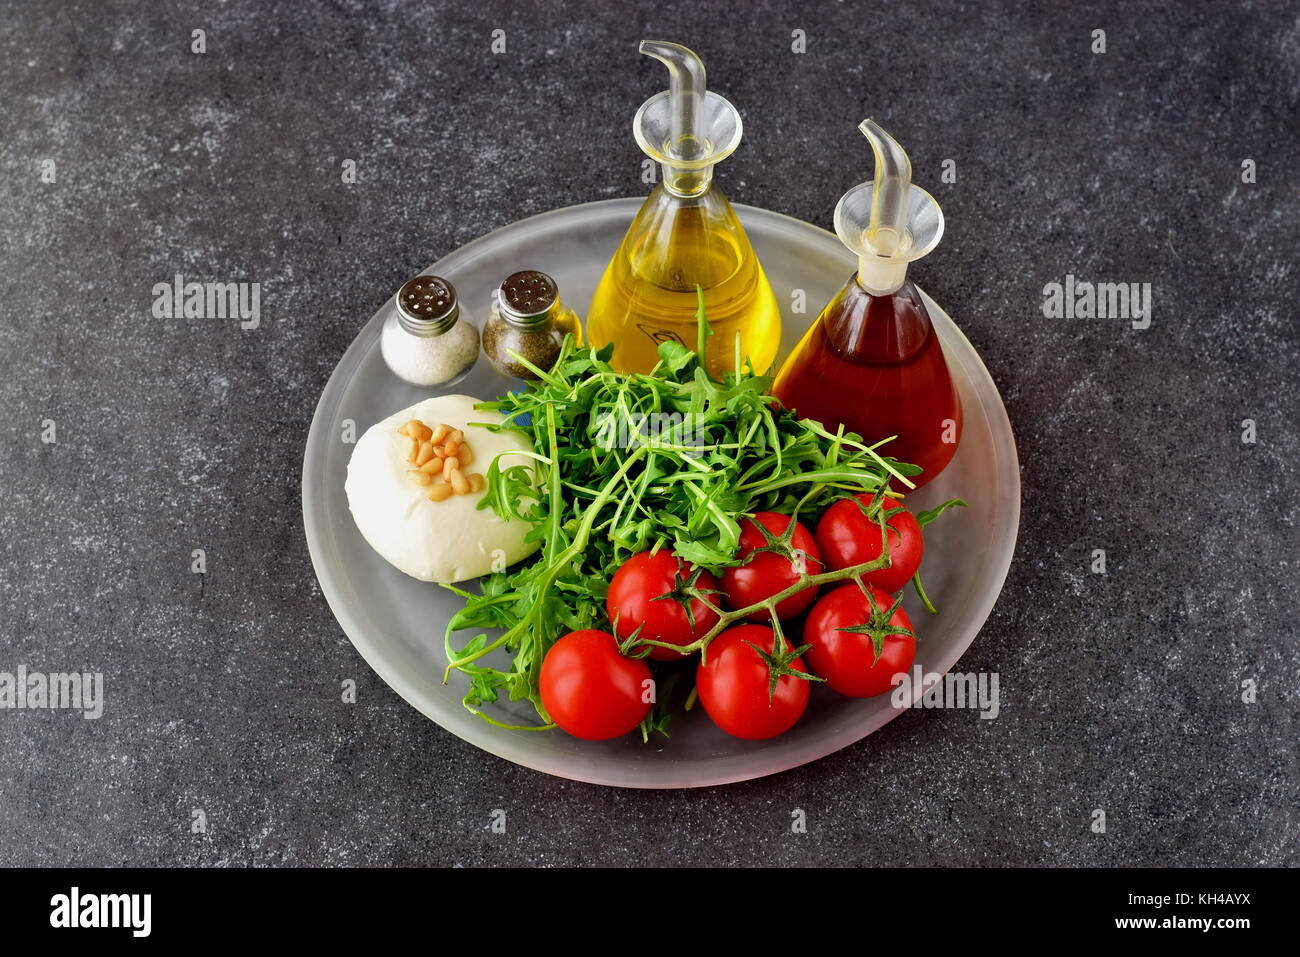 Ingredients for the traditional Italian caprese salad on a glass trey on a grey background with bottles of olive oil and wine vinegar. Stock Photo